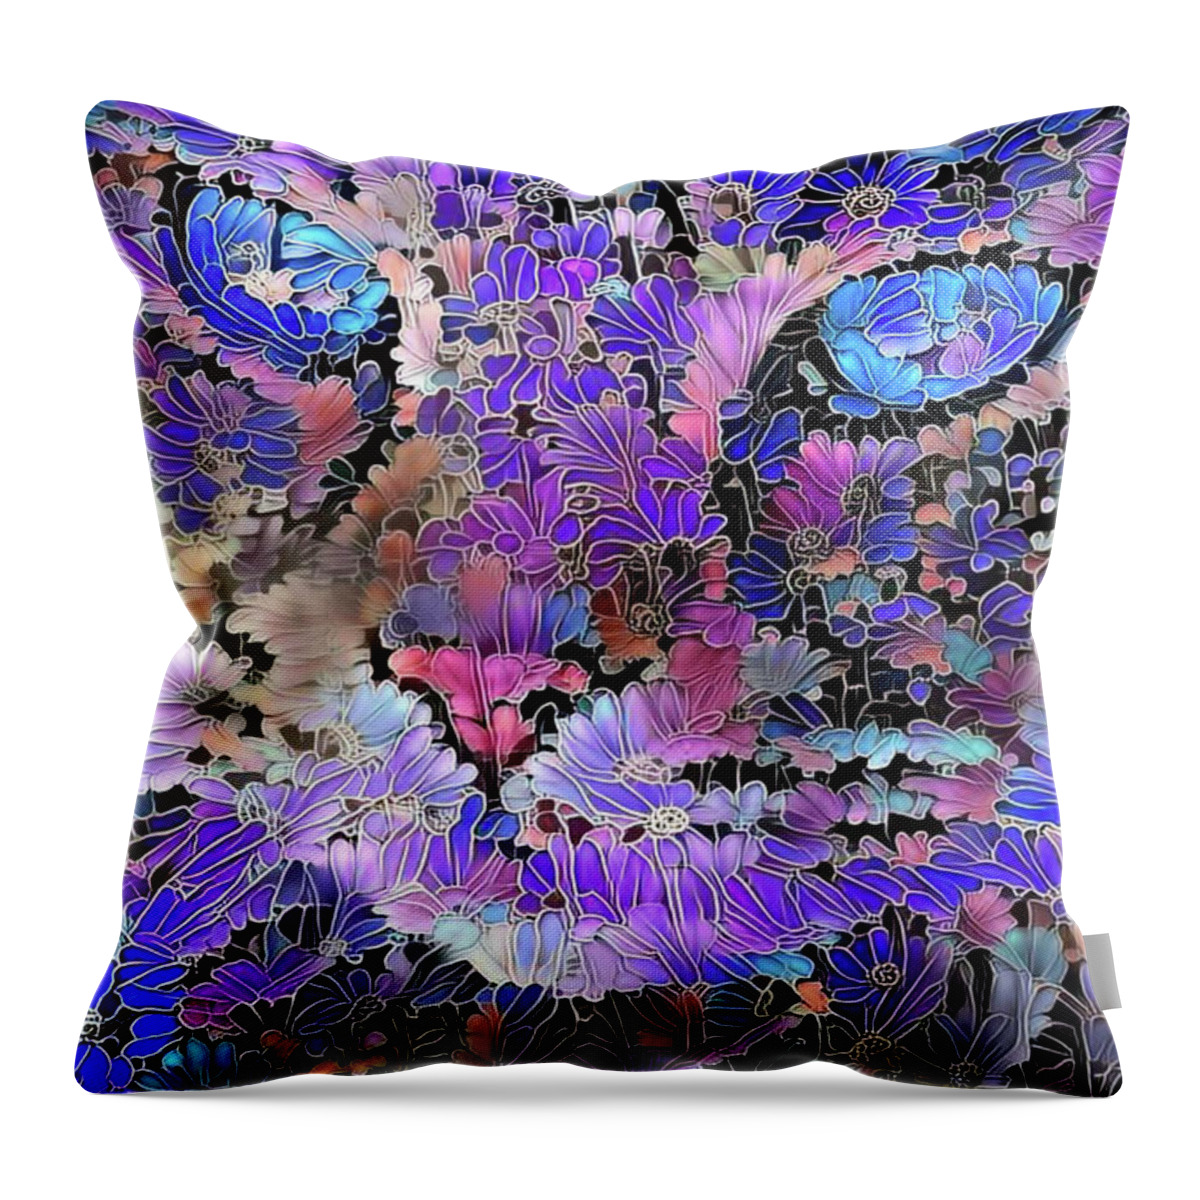 Colorful Cat Throw Pillow featuring the digital art Flower Cat 2 by Peggy Collins